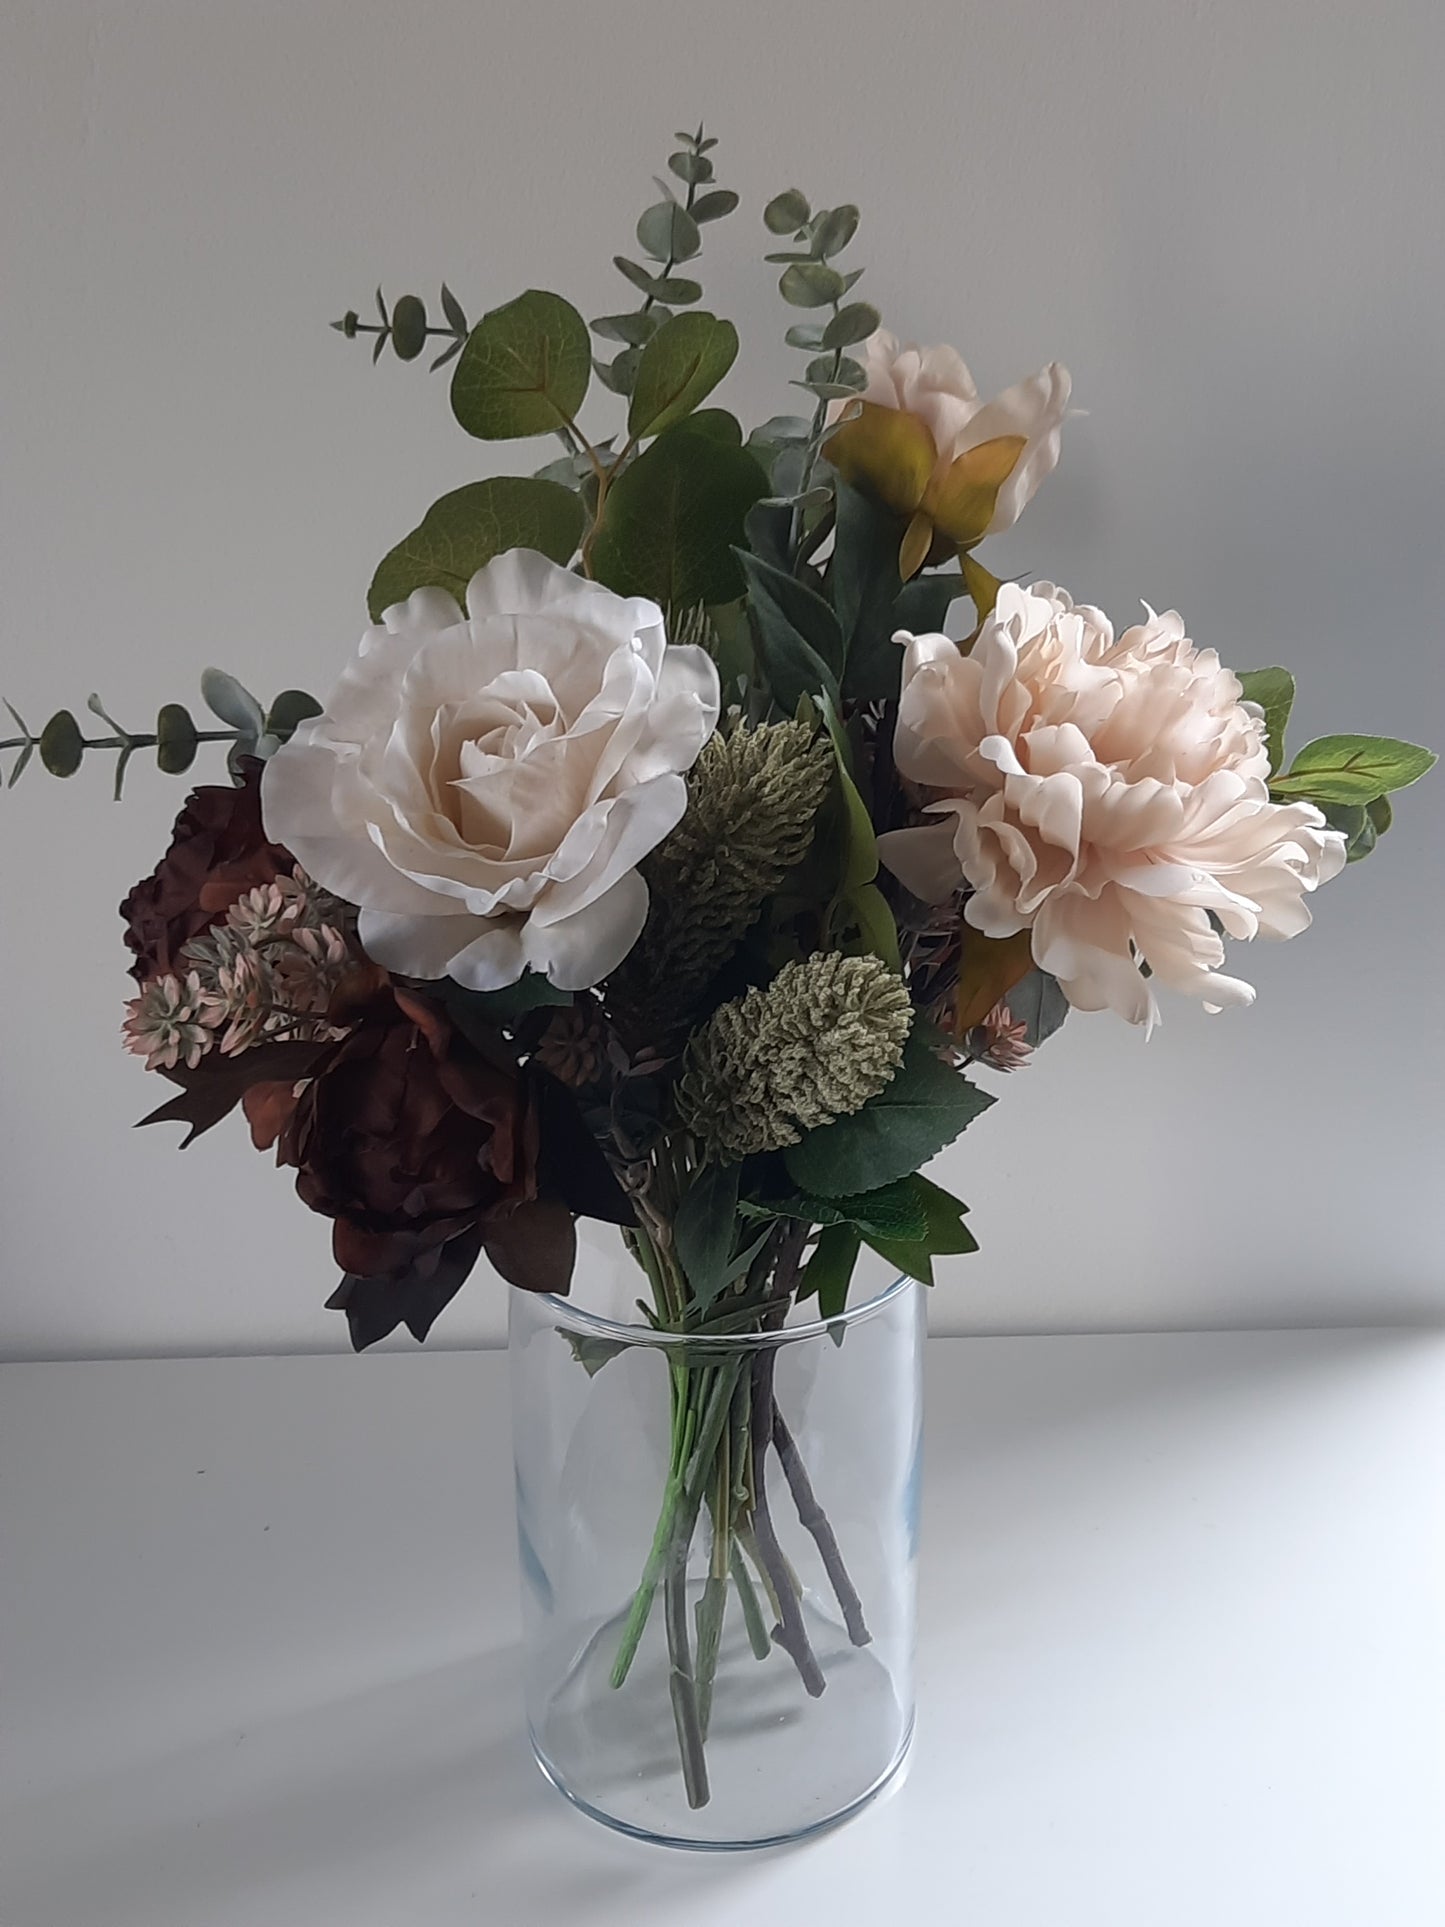 Summer bouquet with poppies and anemones